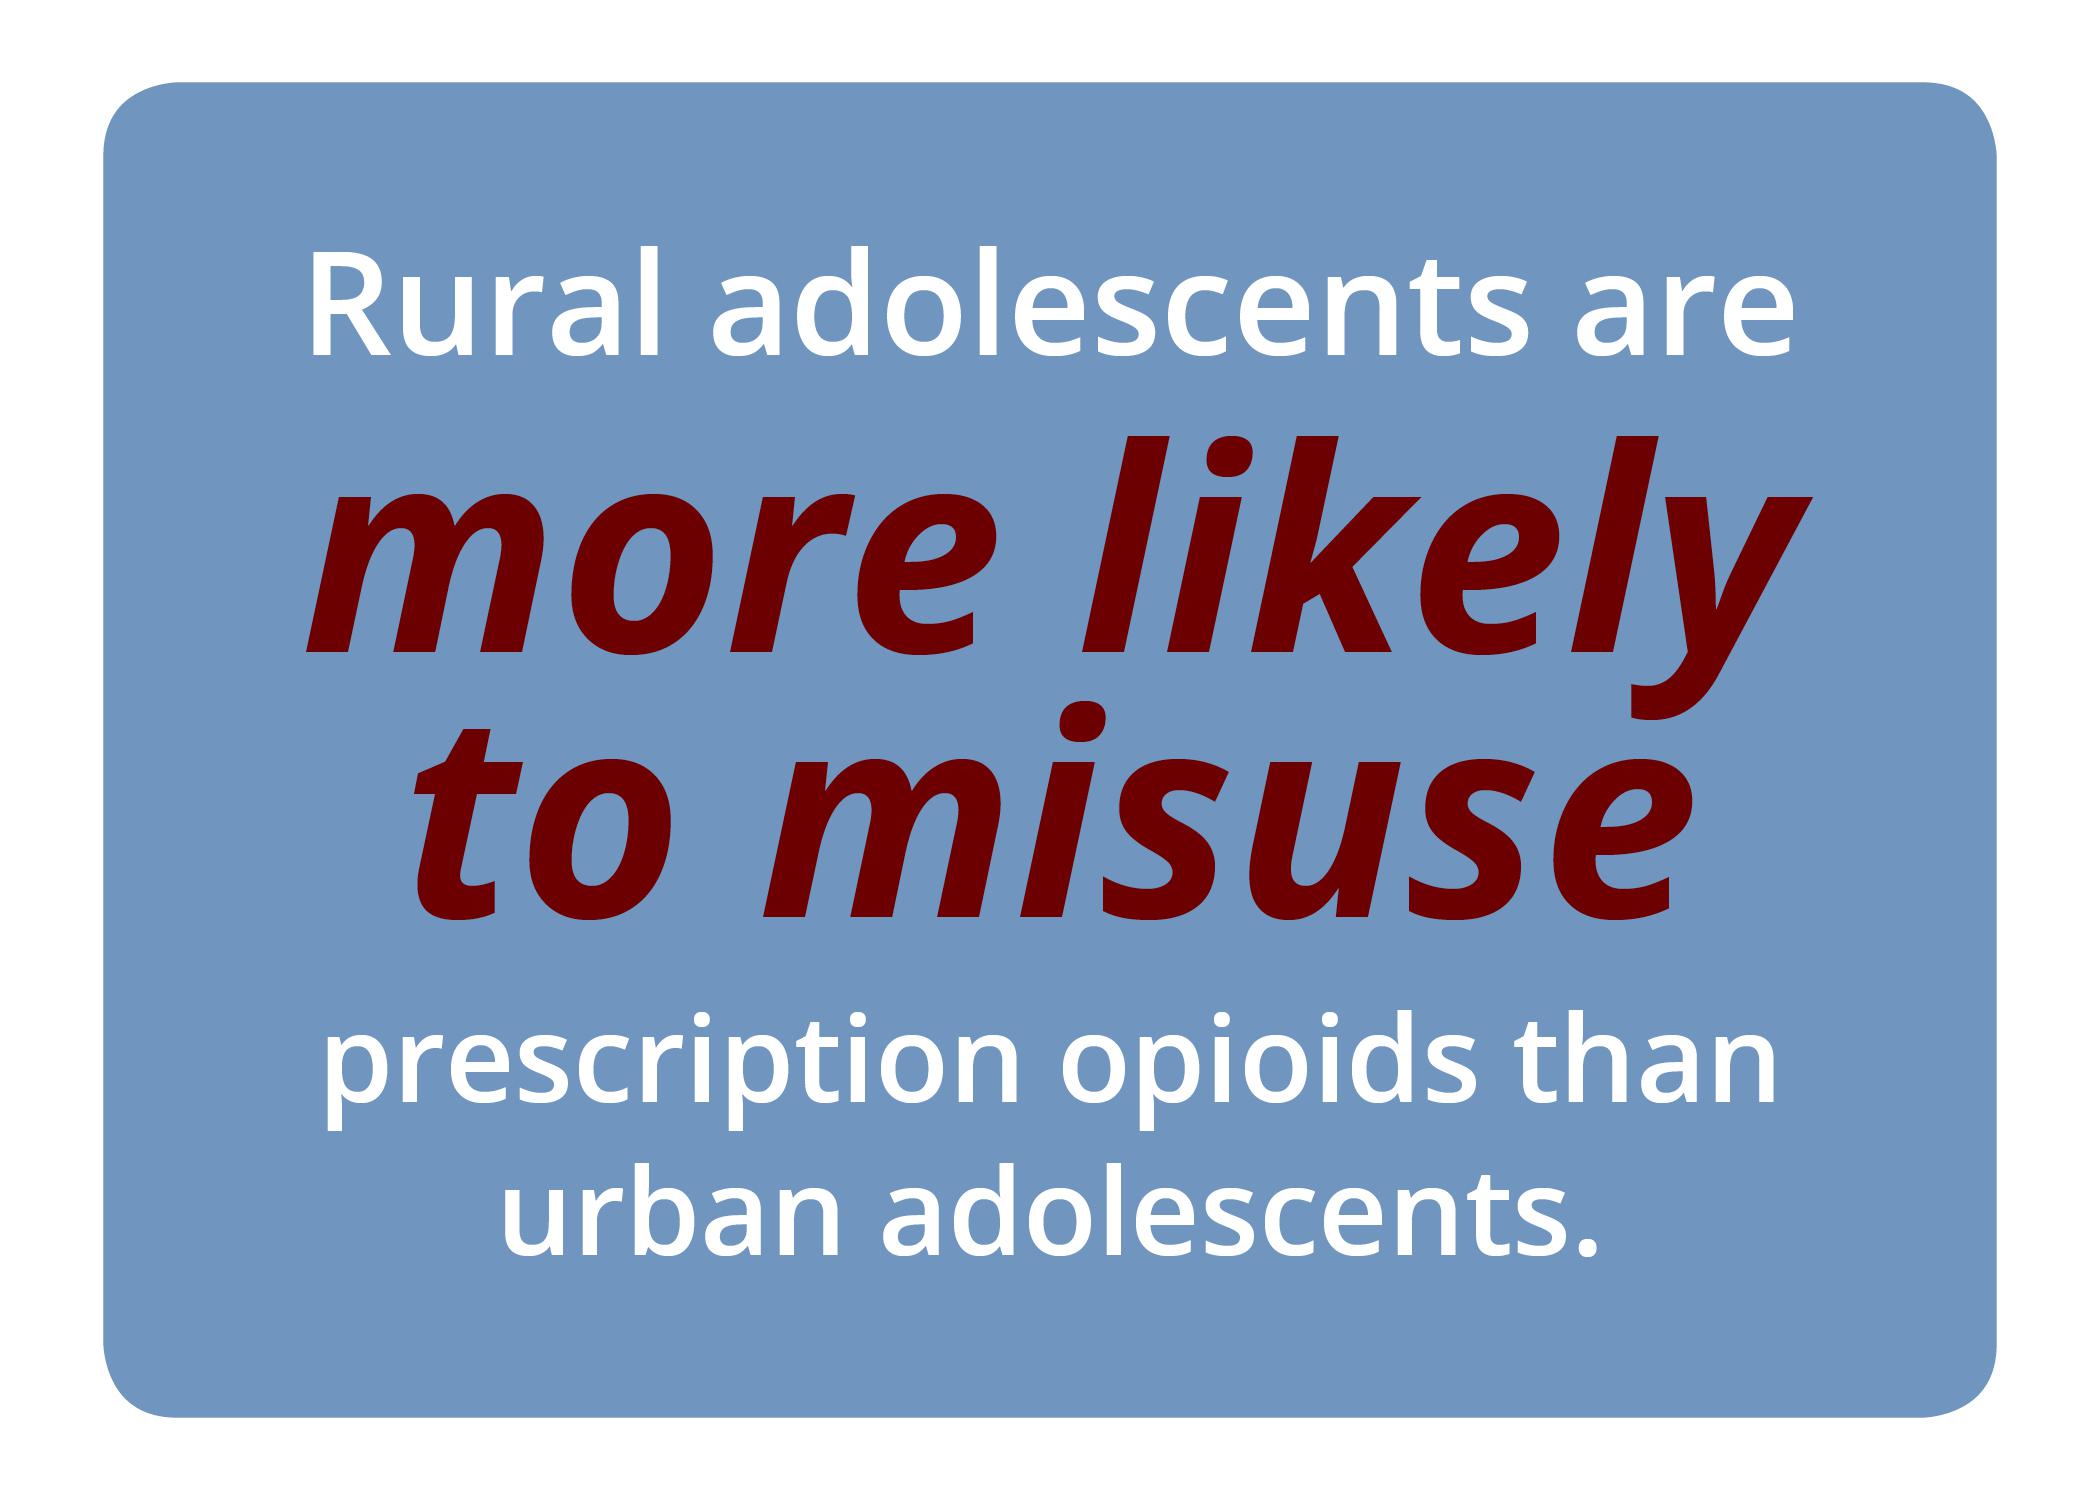 Rural adolescents are more likely to misuse prescription opioids than urban adolescents.